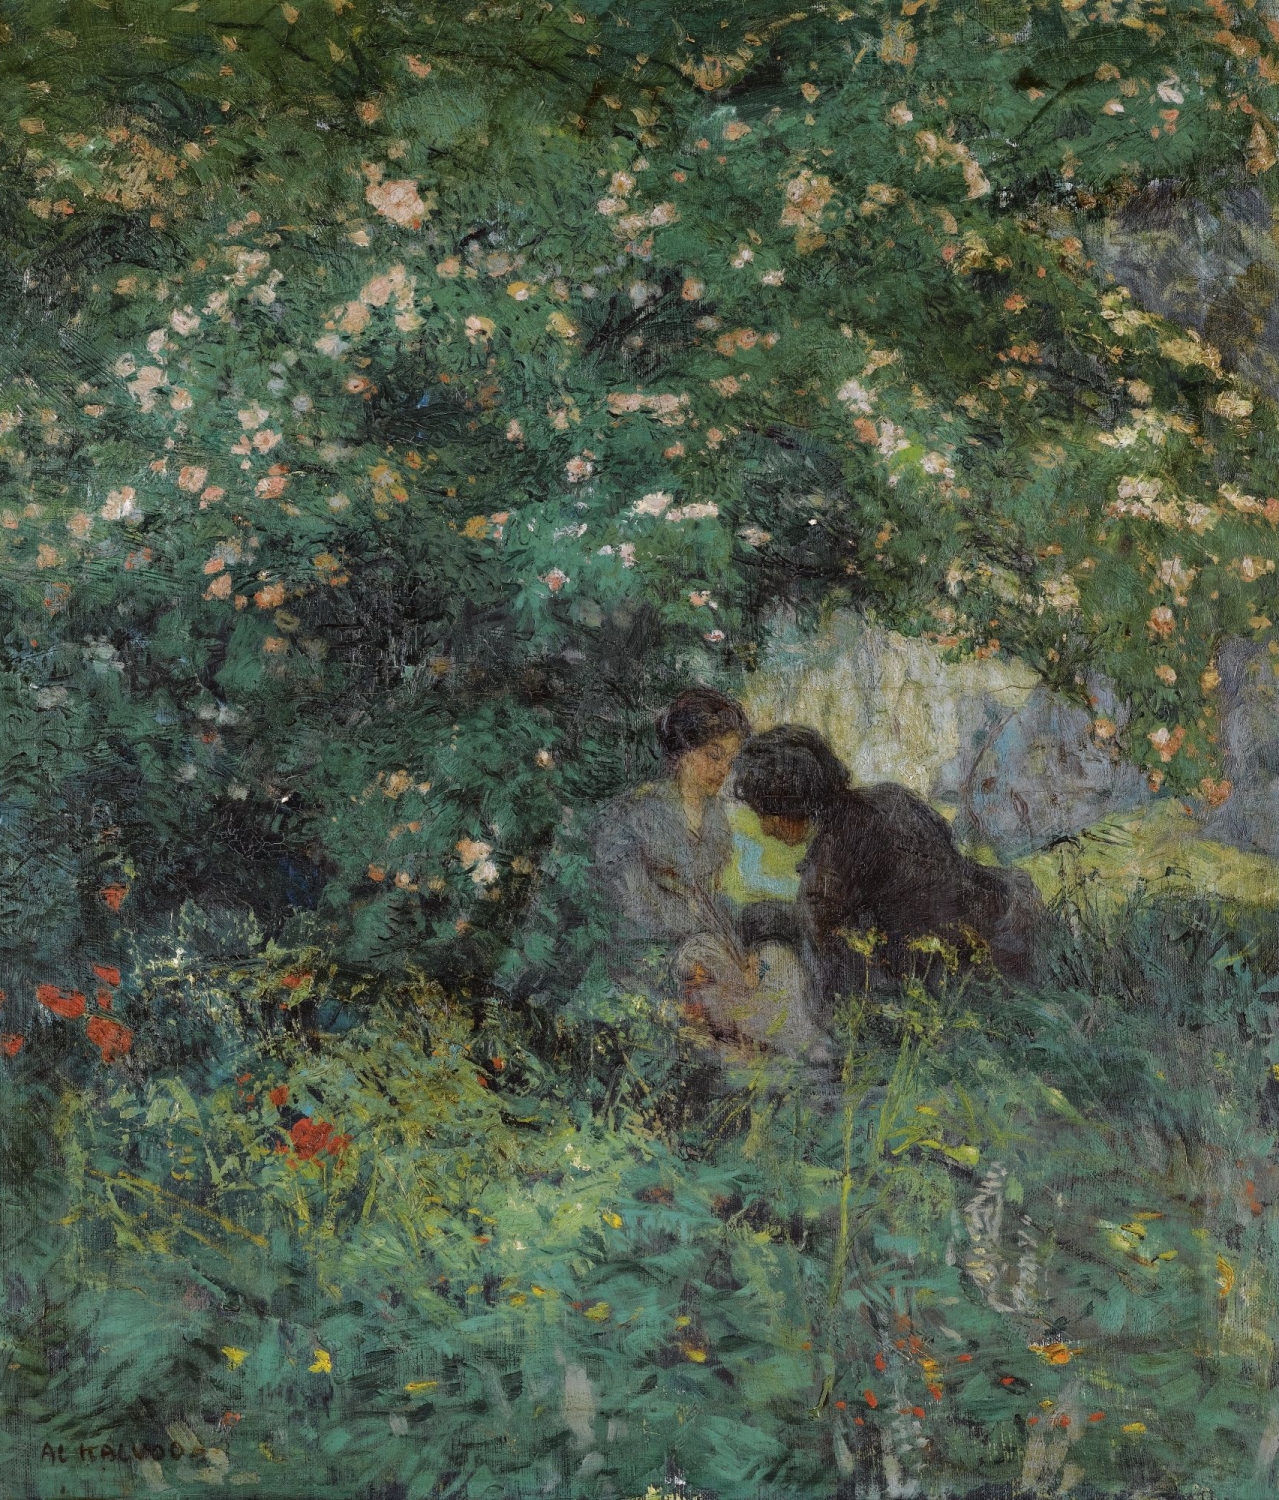 Lovers In The Grass by Alois Kalvoda